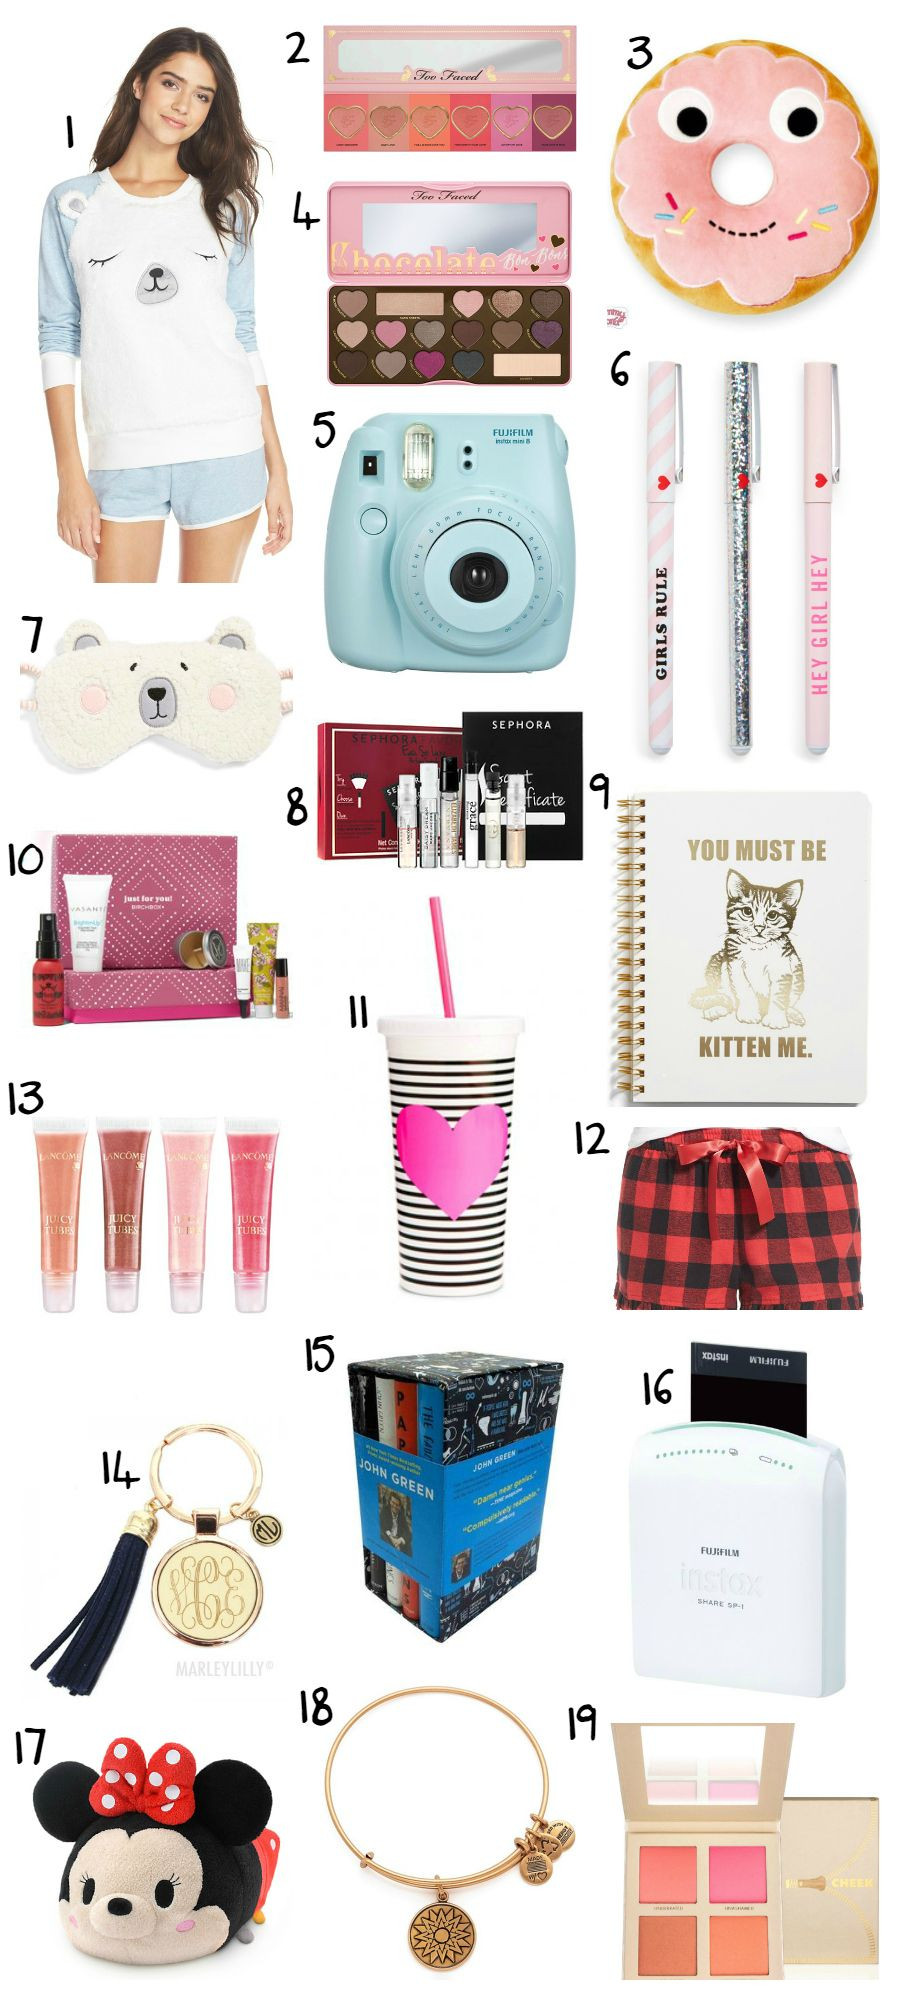 Teenage Girl Christmas Gift Ideas
 The Best Christmas Gift Ideas for Teens